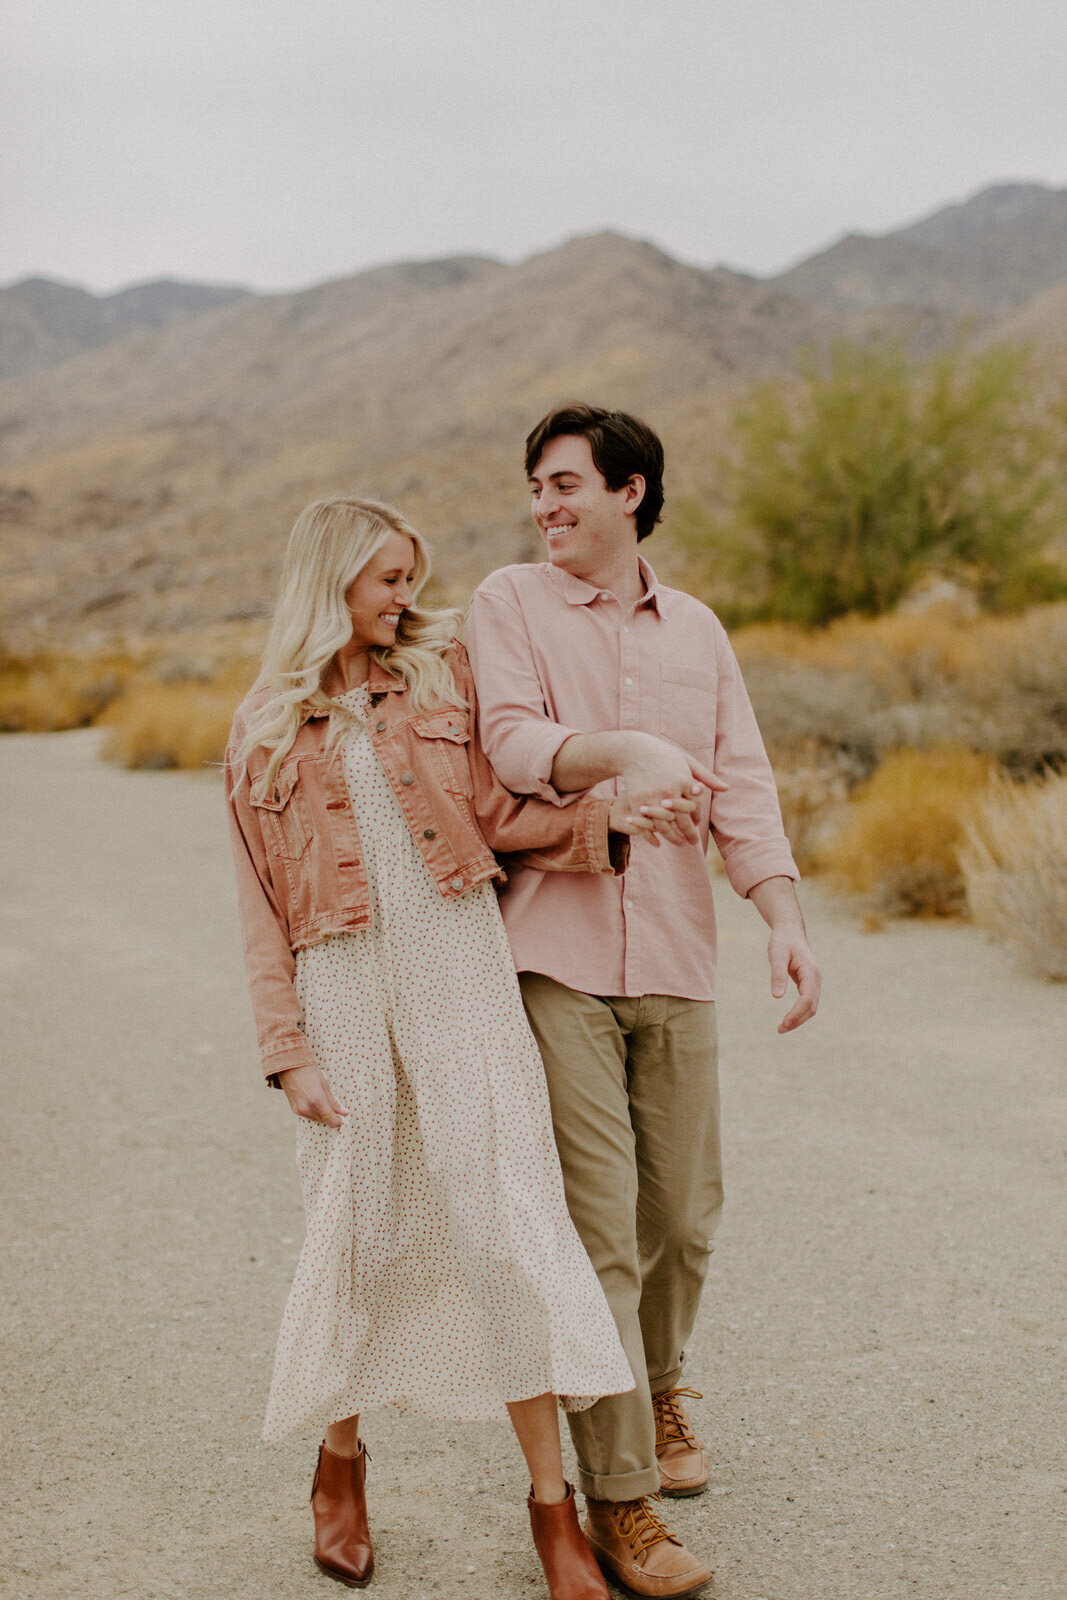 Brianna-Broyles-Photography-Pink-Palm-Springs-Engagement-Session-2.jpg